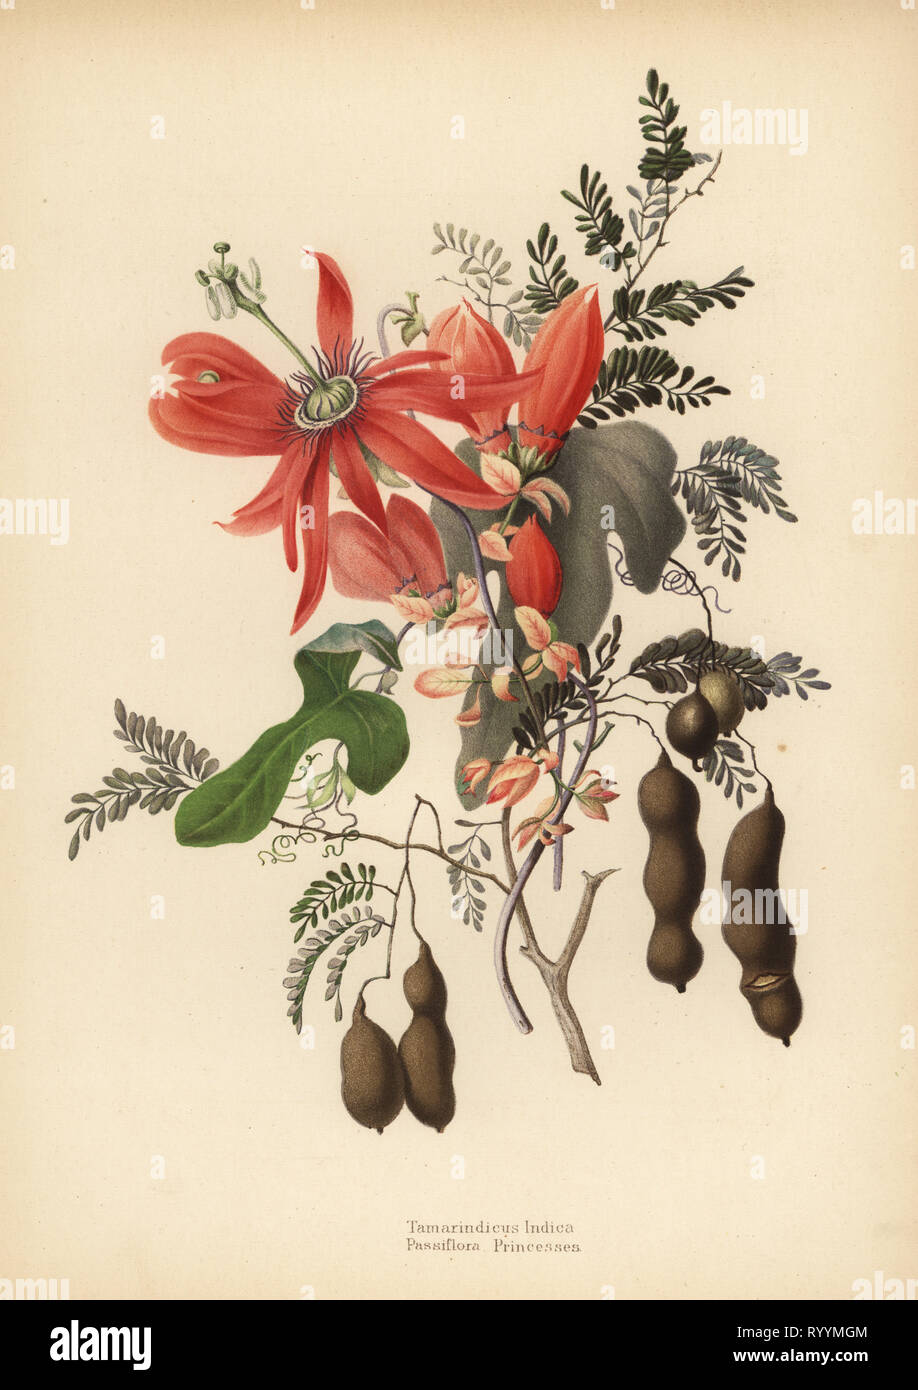 Tamarind Tamarindus Indica And Red Passionflower Passiflora Racemosa Passiflora Princeps Chromolithograph After A Botanical Drawing By Emily Eden From Her Flowers From An Indian Garden Second Series Hope Breidenbach Co Dusseldorf